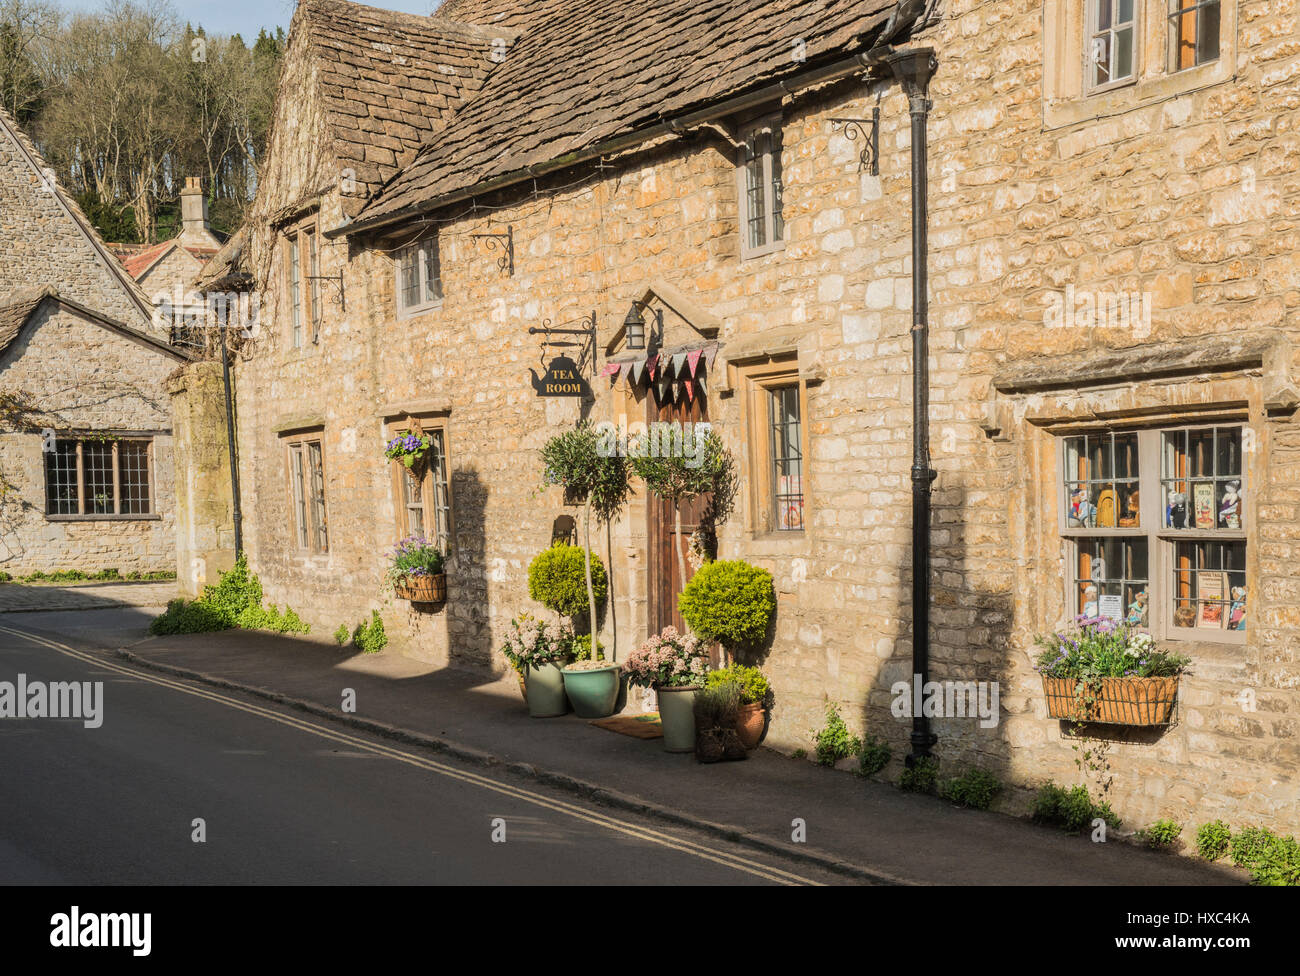 The Tea Room at Castle Combe Village in Wiltshire England Stock Photo